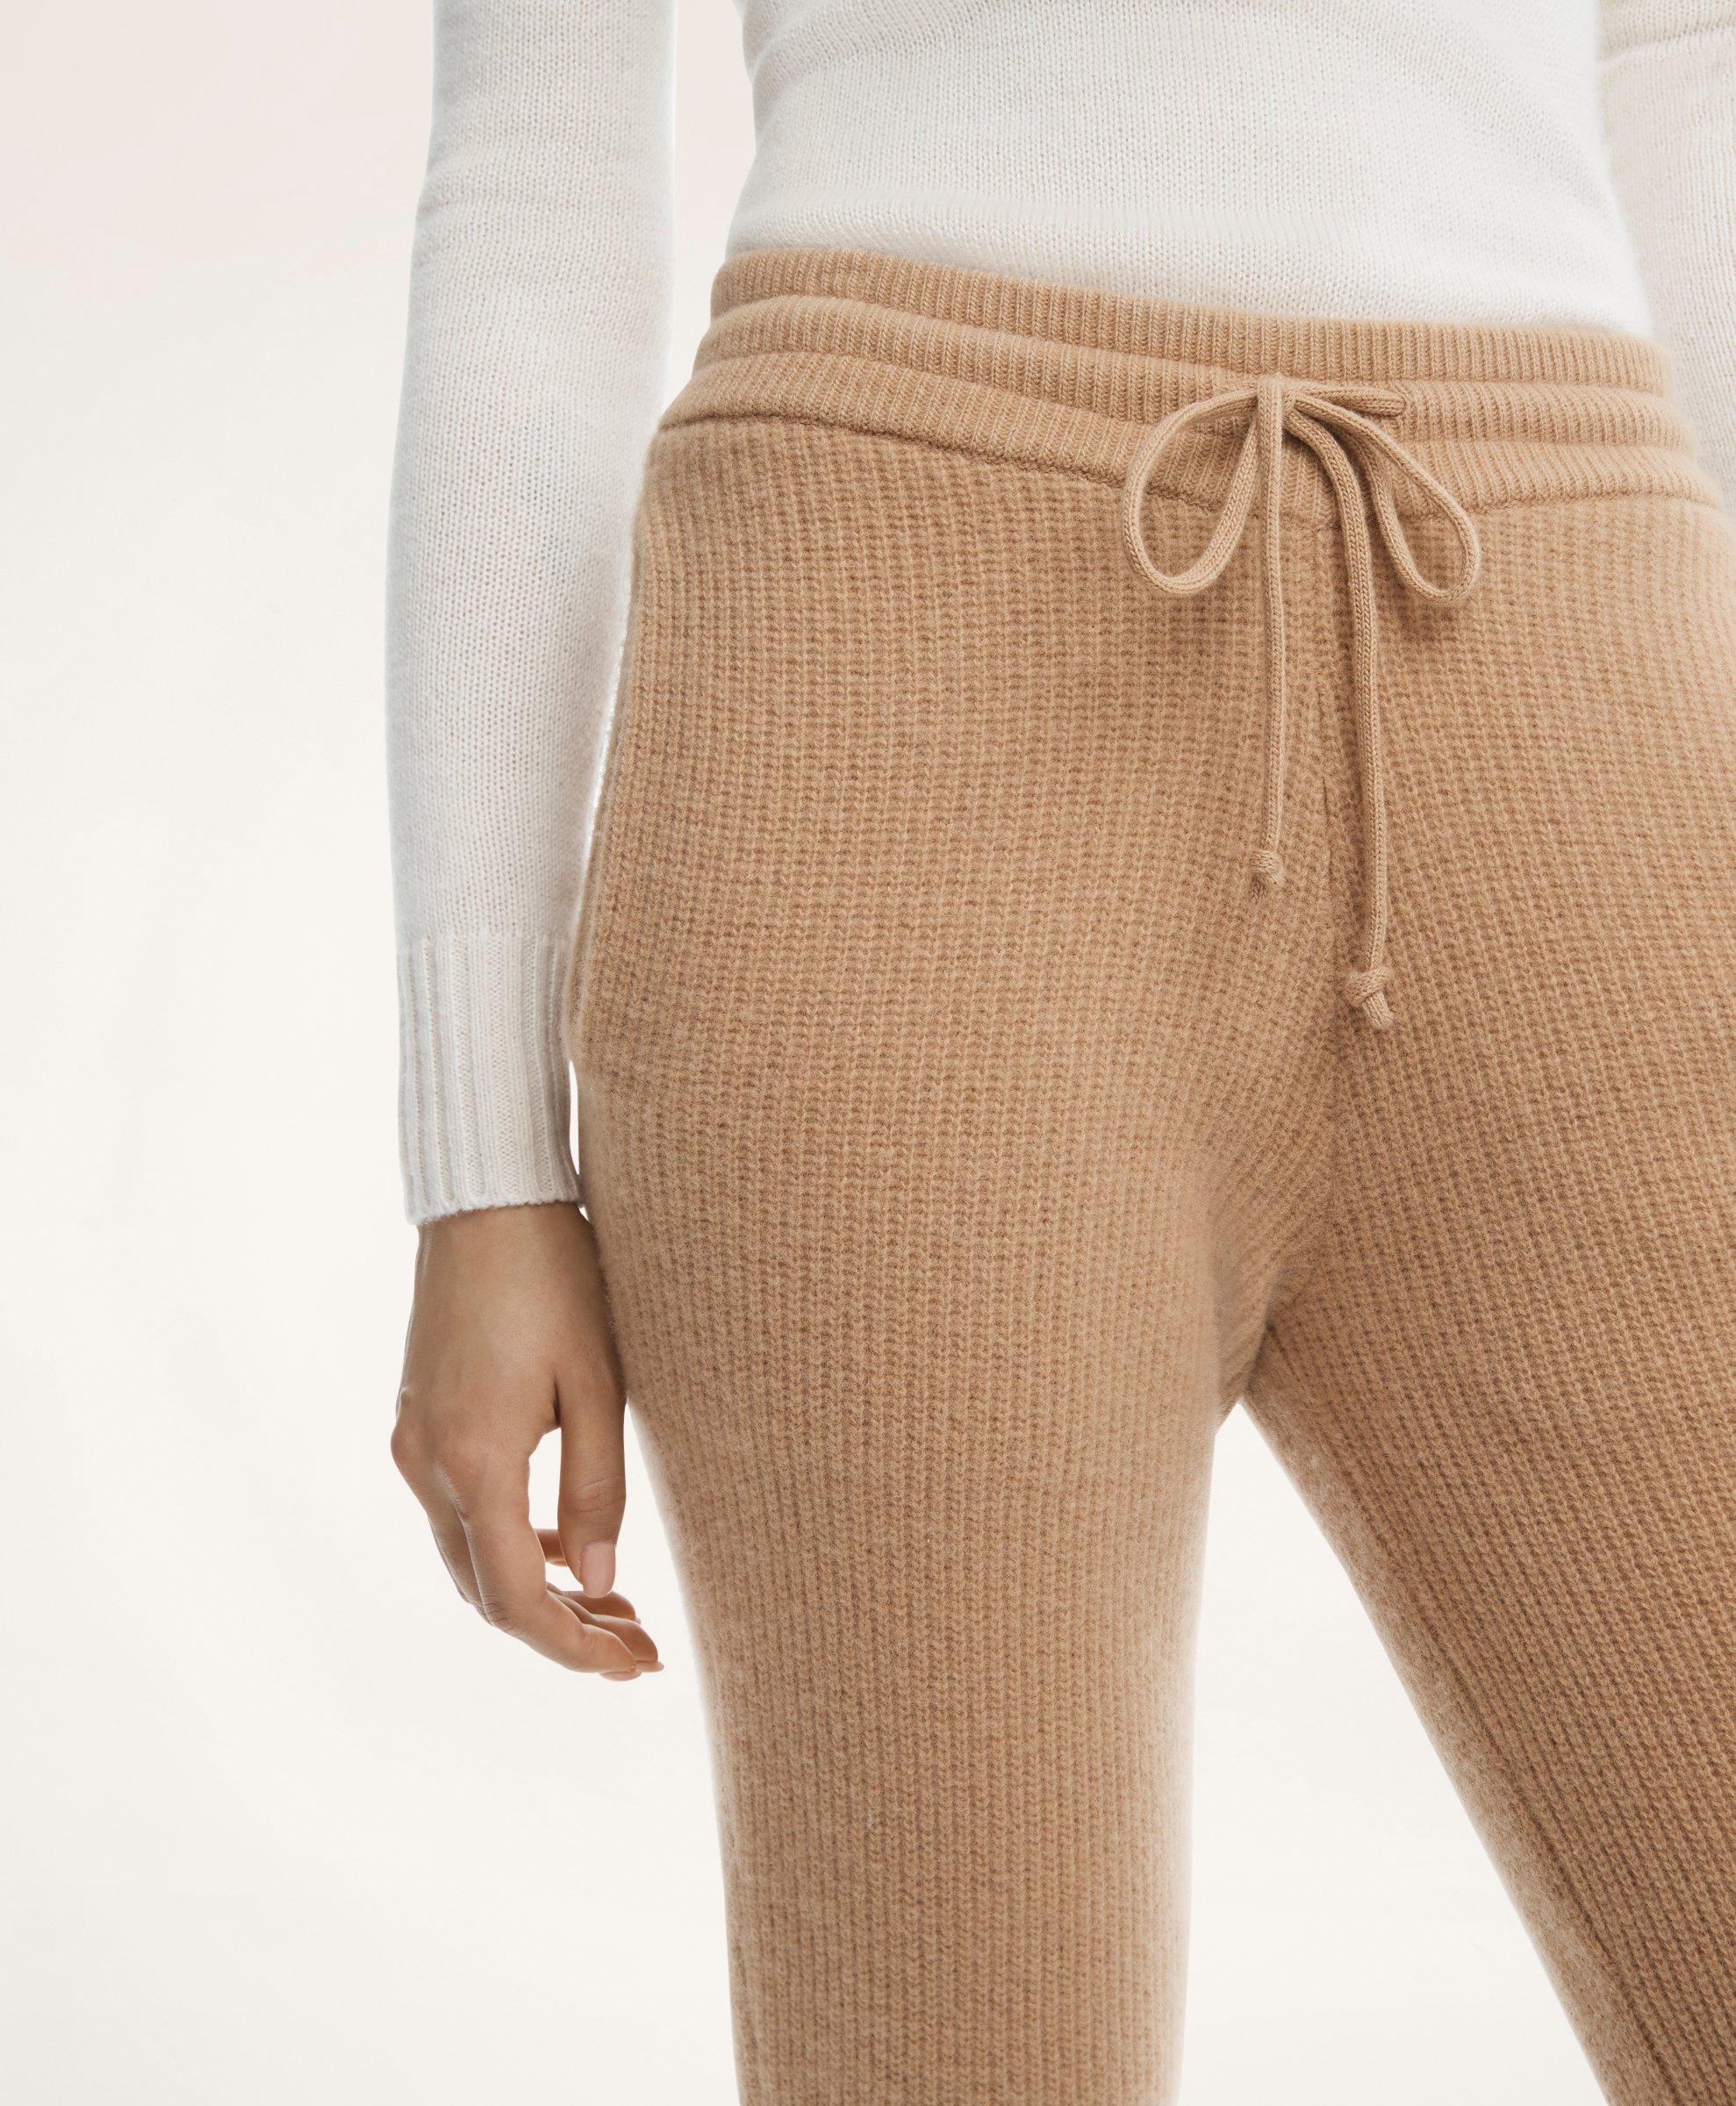 Ladies Cashmere Joggers Pants in Camel brown